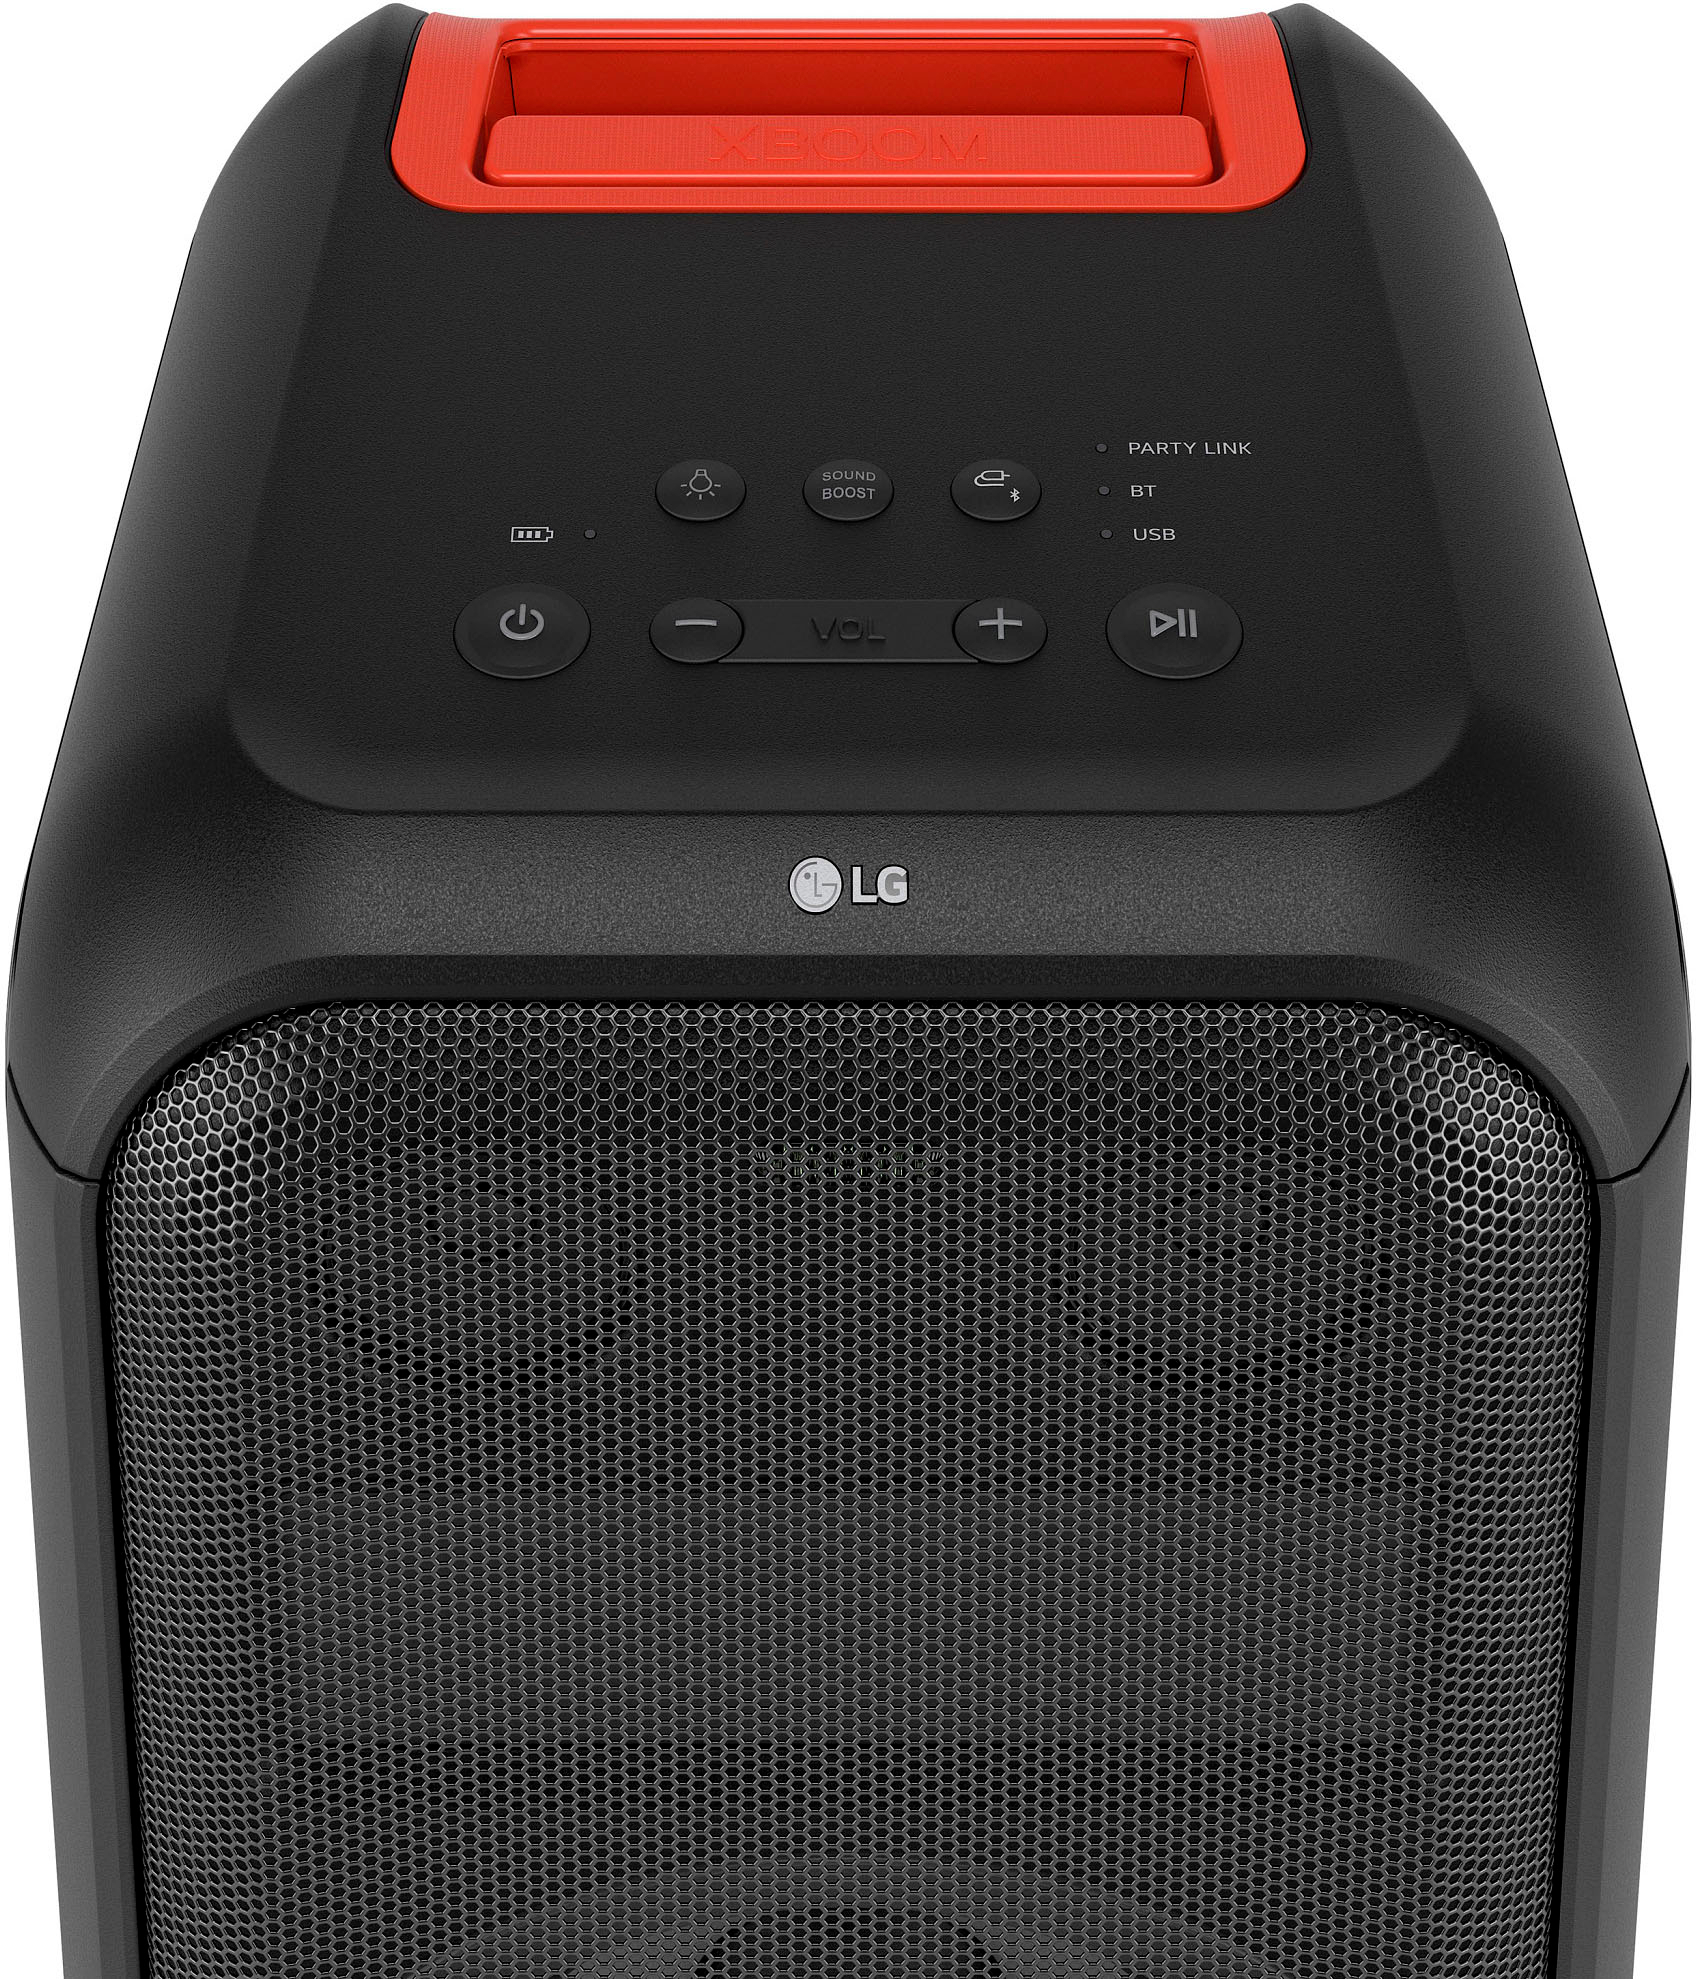 LG XBOOM XL7 Portable Tower Speaker with 250W of Power and Pixel LED  Lighting with up to 20 Hrs of Battery Life